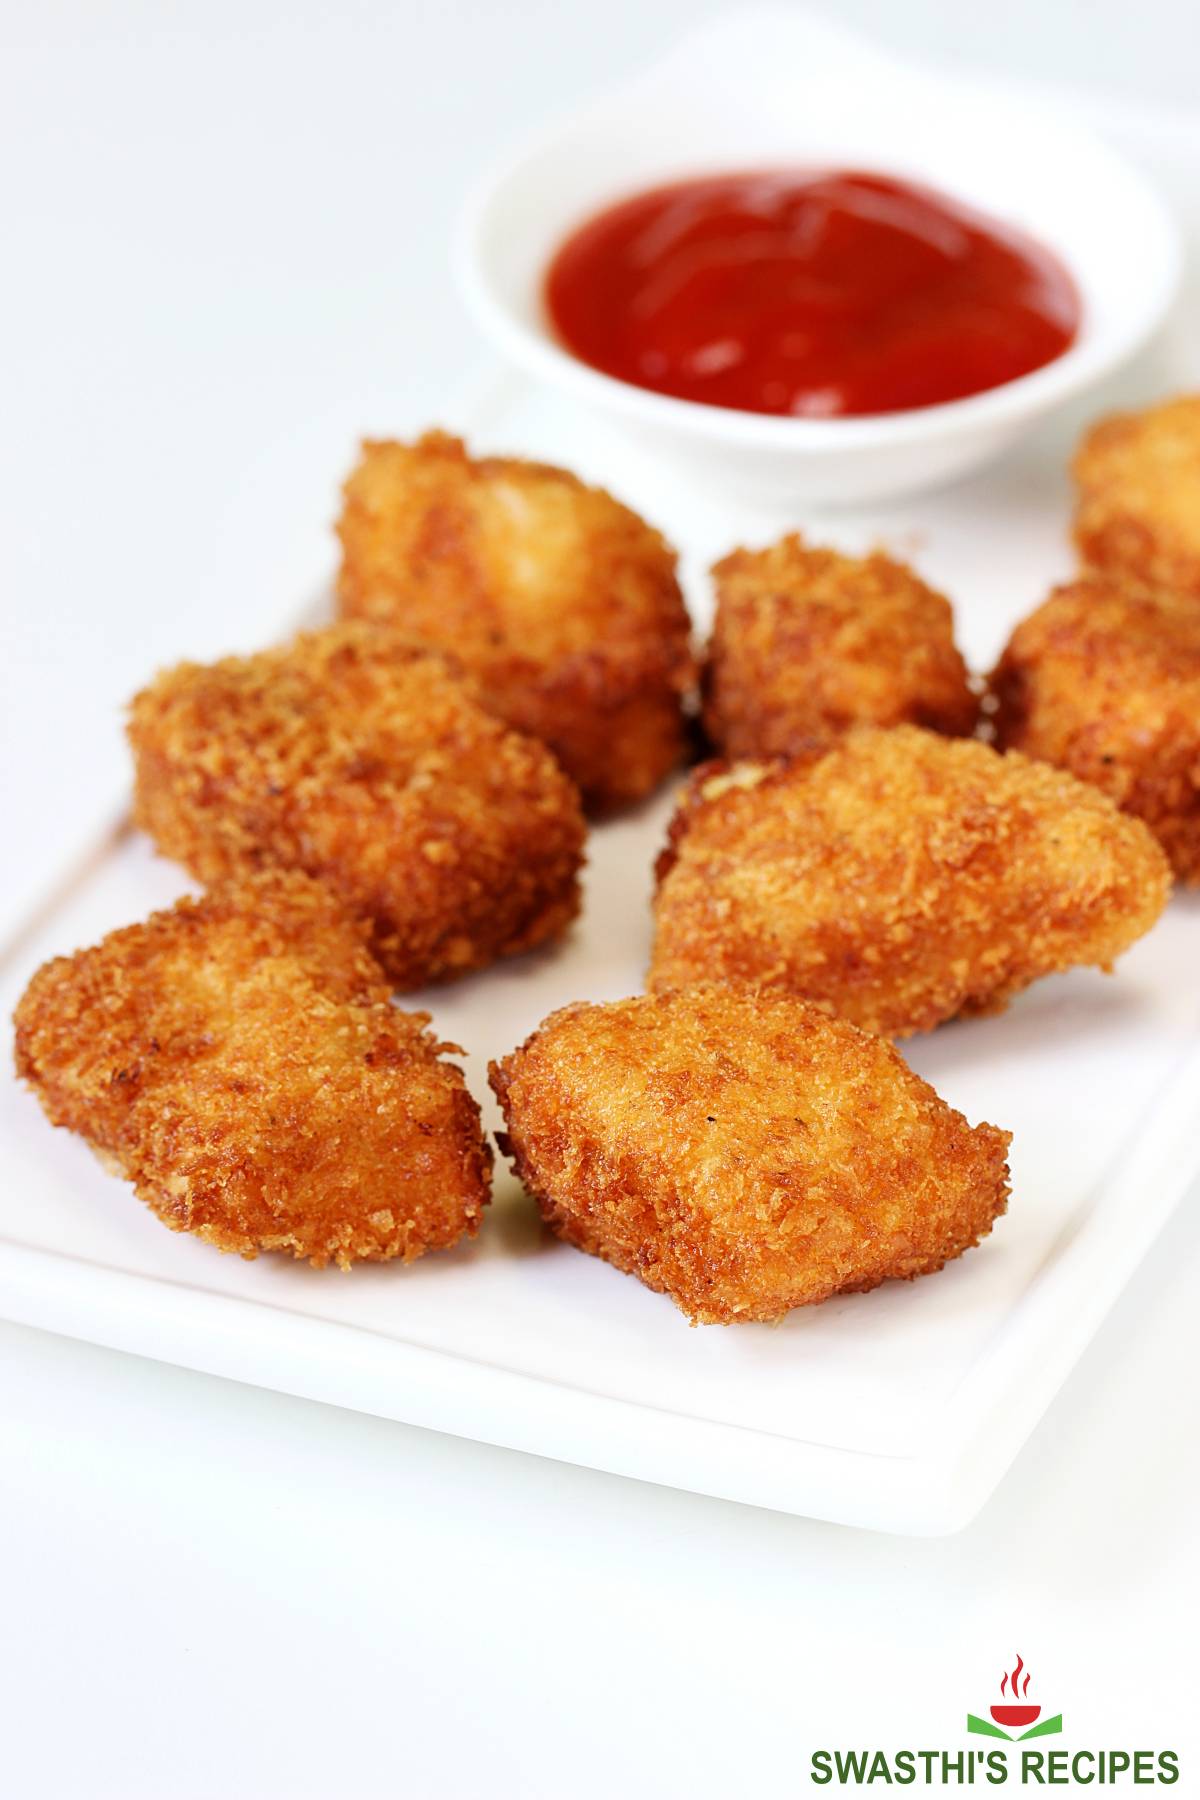 Chicken nuggets (fried, baked &amp; air fryer) - Pritchard Gingaid